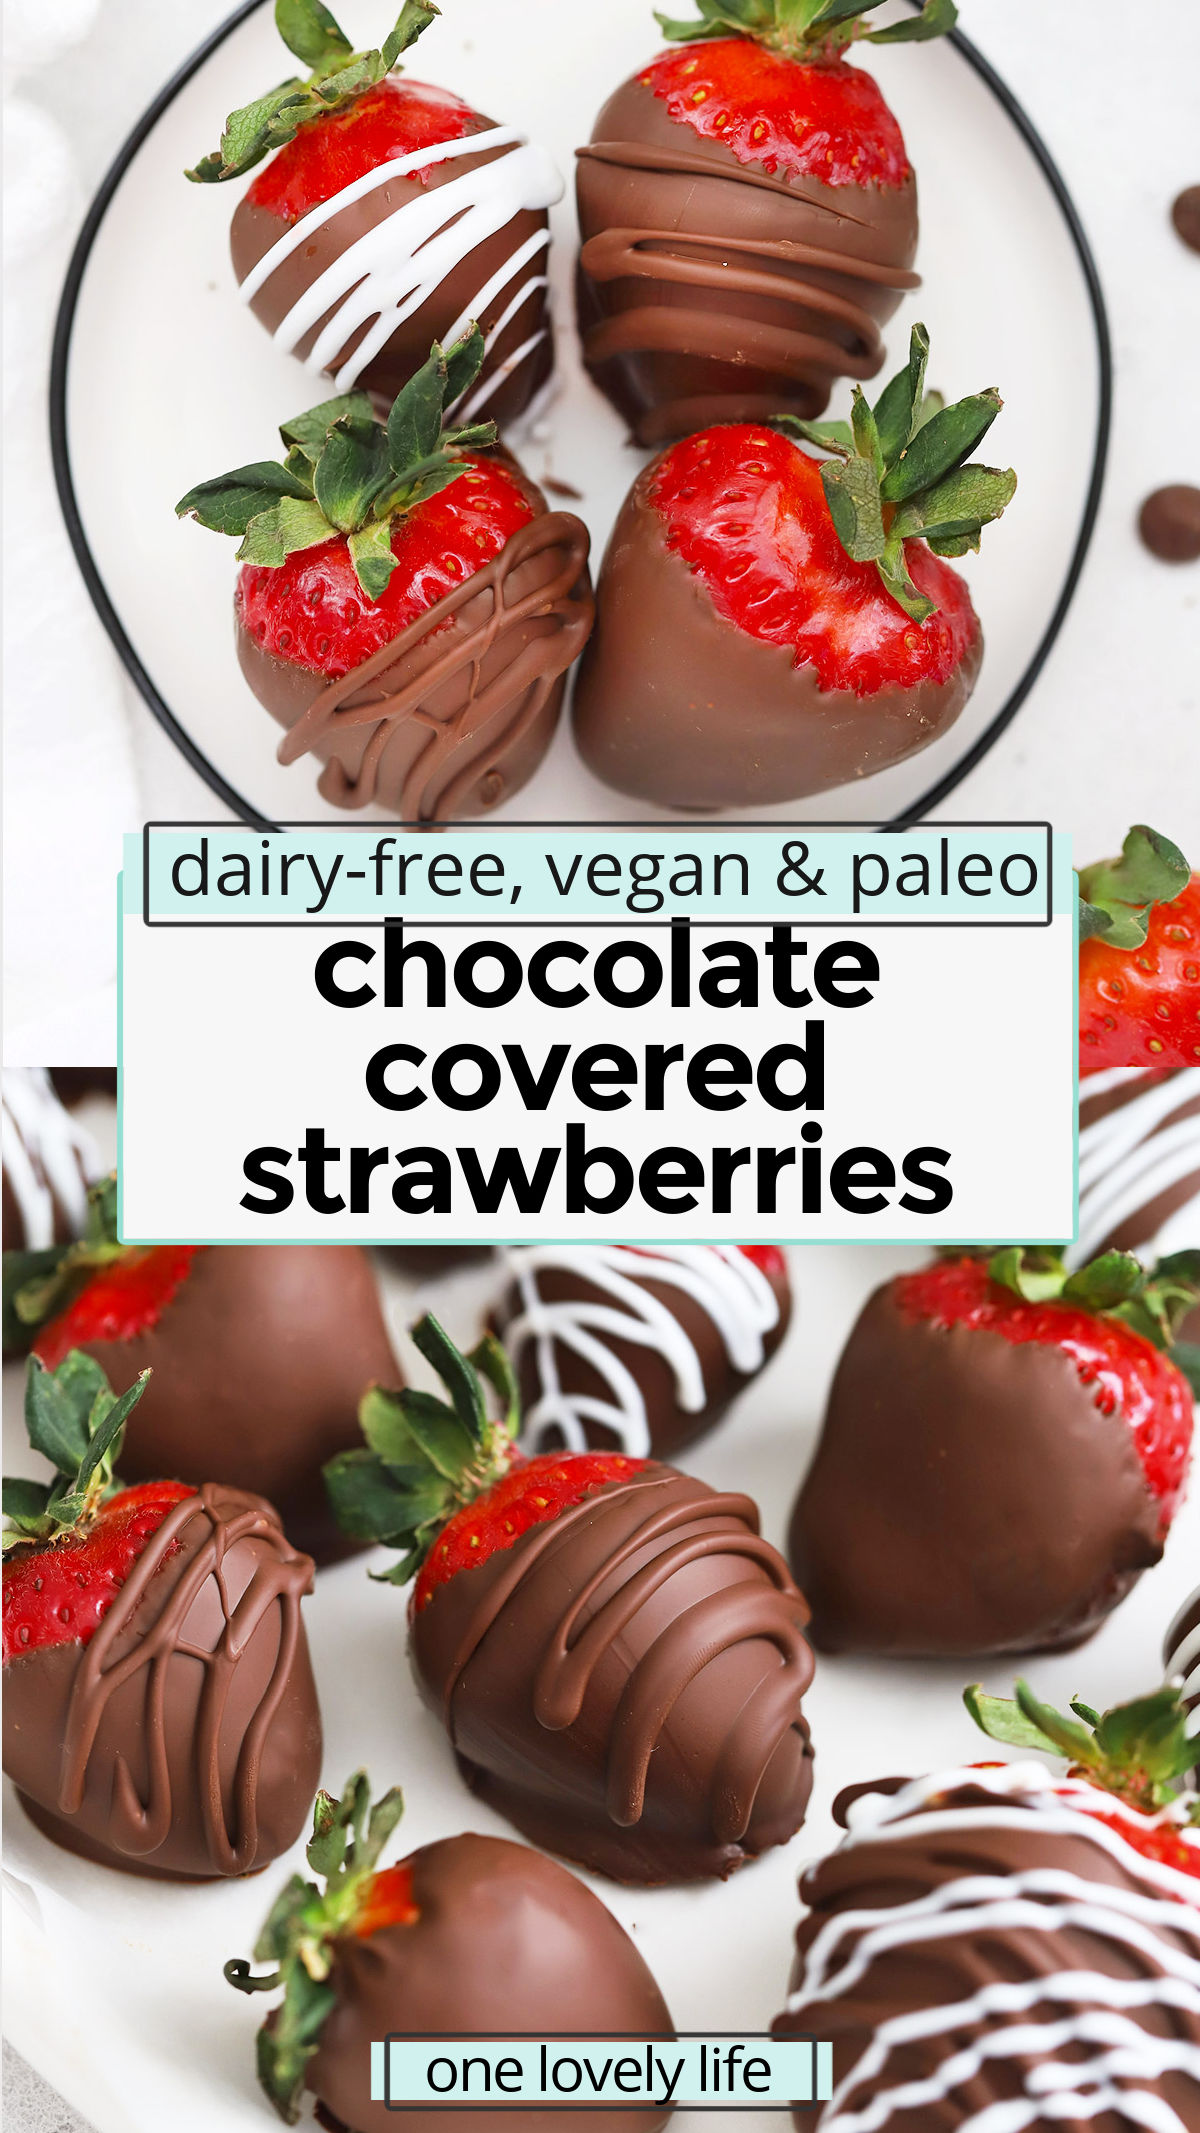 How to Make Chocolate Covered Strawberries - Here is everything you need to know to make this classic dessert! I'll even show you how to make them dairy-free, vegan, and paleo-approved! // Paleo Chocolate covered strawberries // dairy-free chocolate-covered strawberries // vegan chocolate covered strawberries // valentines day dessert // healthy chocolate covered strawberries // valentine's day dessert //